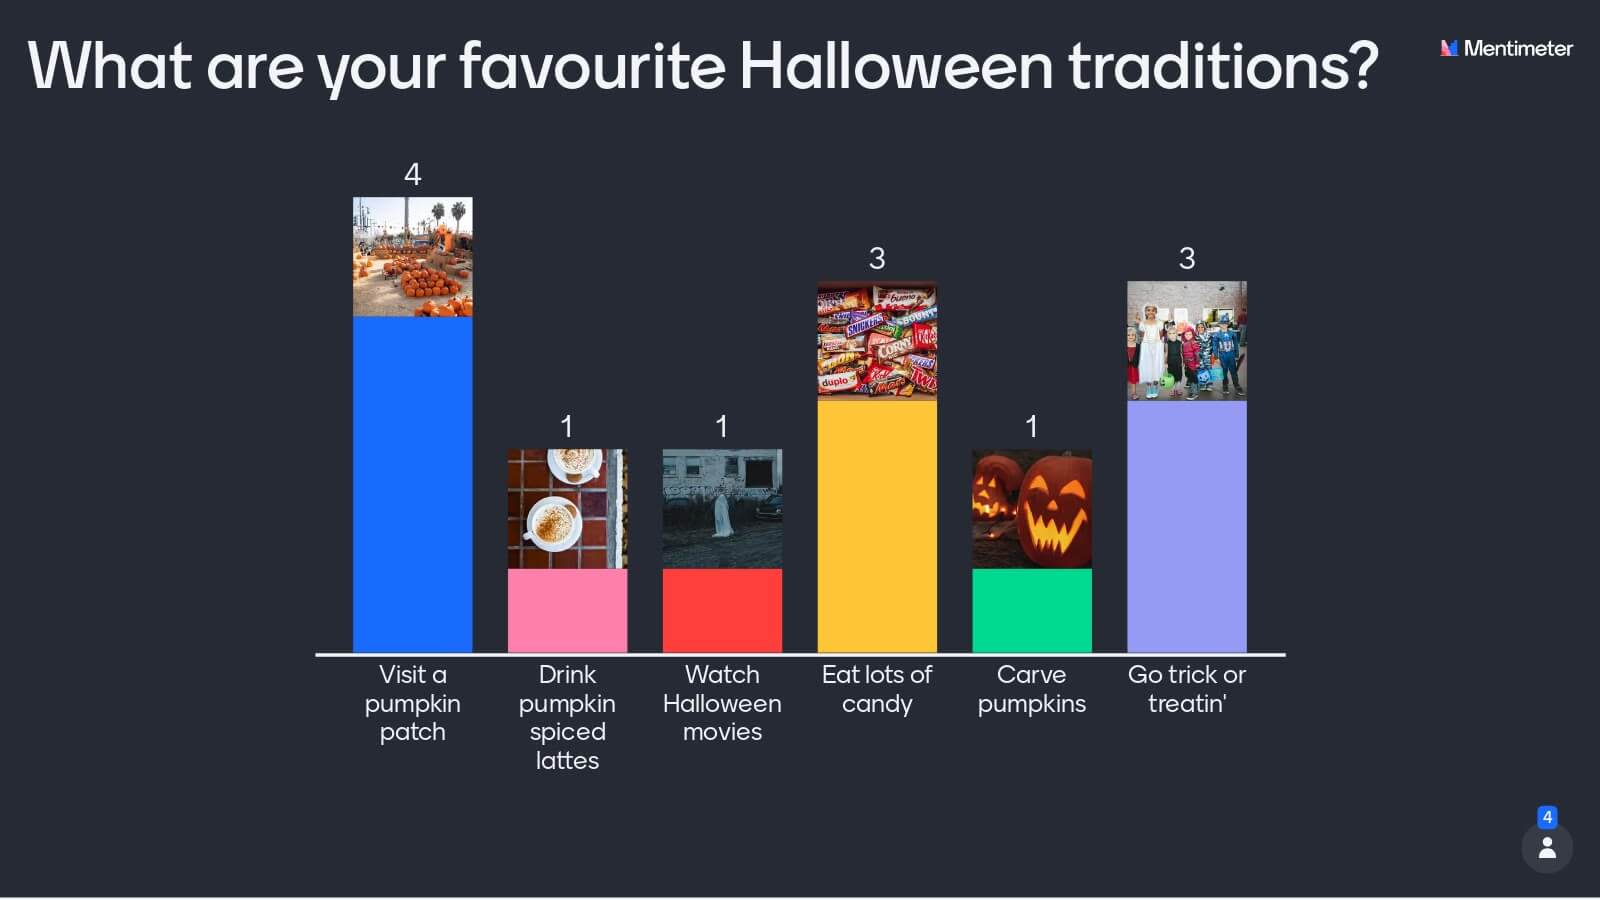 What are your favorite Halloween traditions?